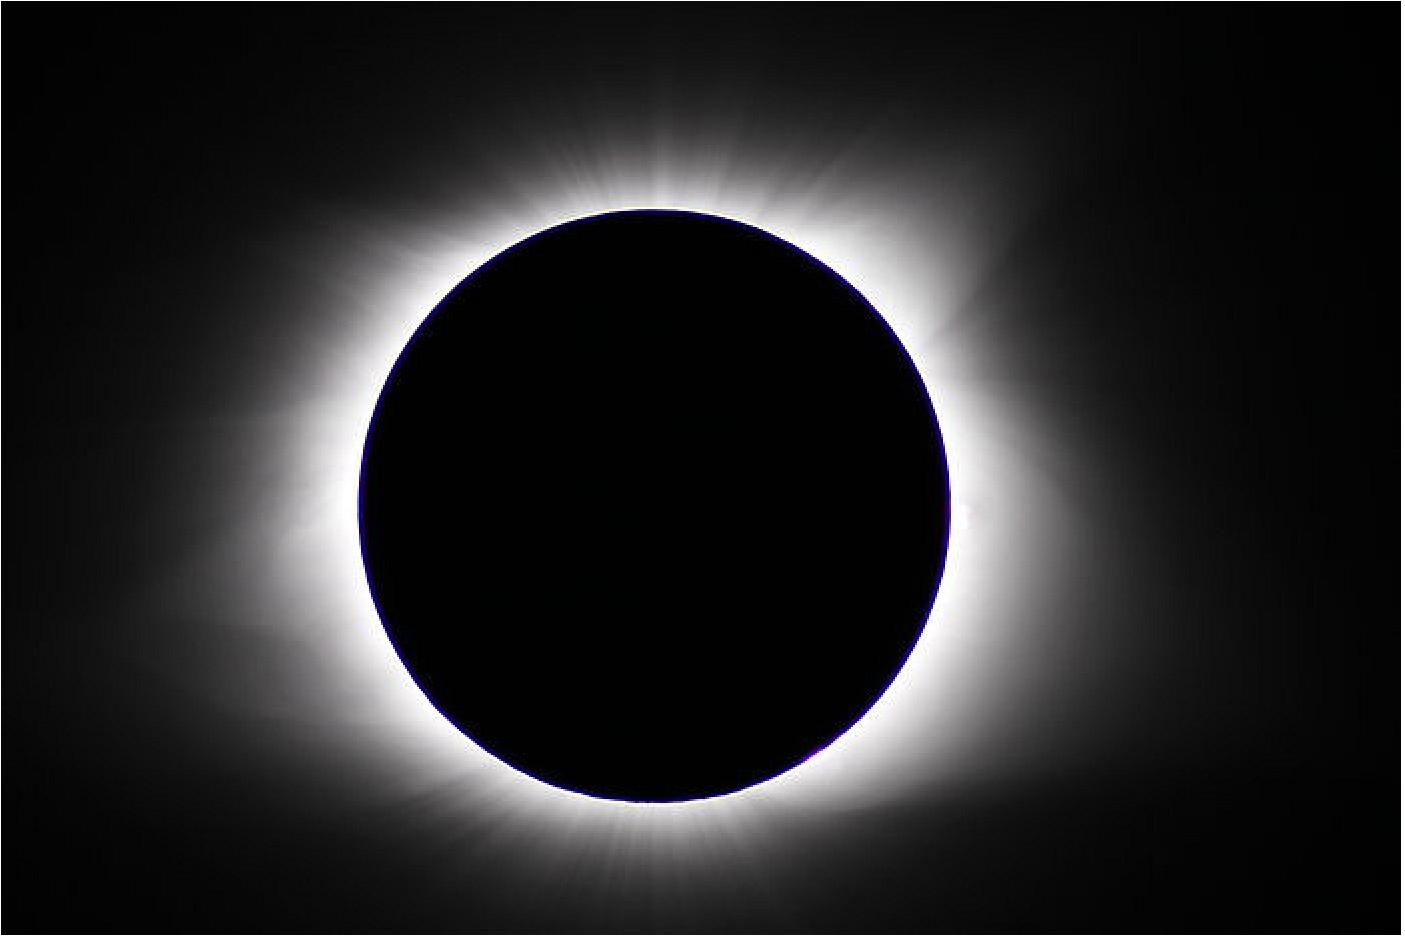 Figure 27: The total solar eclipse seen from Casper, Wyoming (US), by a team of ESA astronomers, as part of the CESAR (Cooperation through Education in Science and Astronomy Research) educational initiative. The image shows the moment of totality, when the Moon passed directly in front of the Sun, blocking its light and revealing the details of the Sun's atmosphere, its corona (image credit: ESA / M. P. Ayucar, CC BY-SA 3.0 IGO)